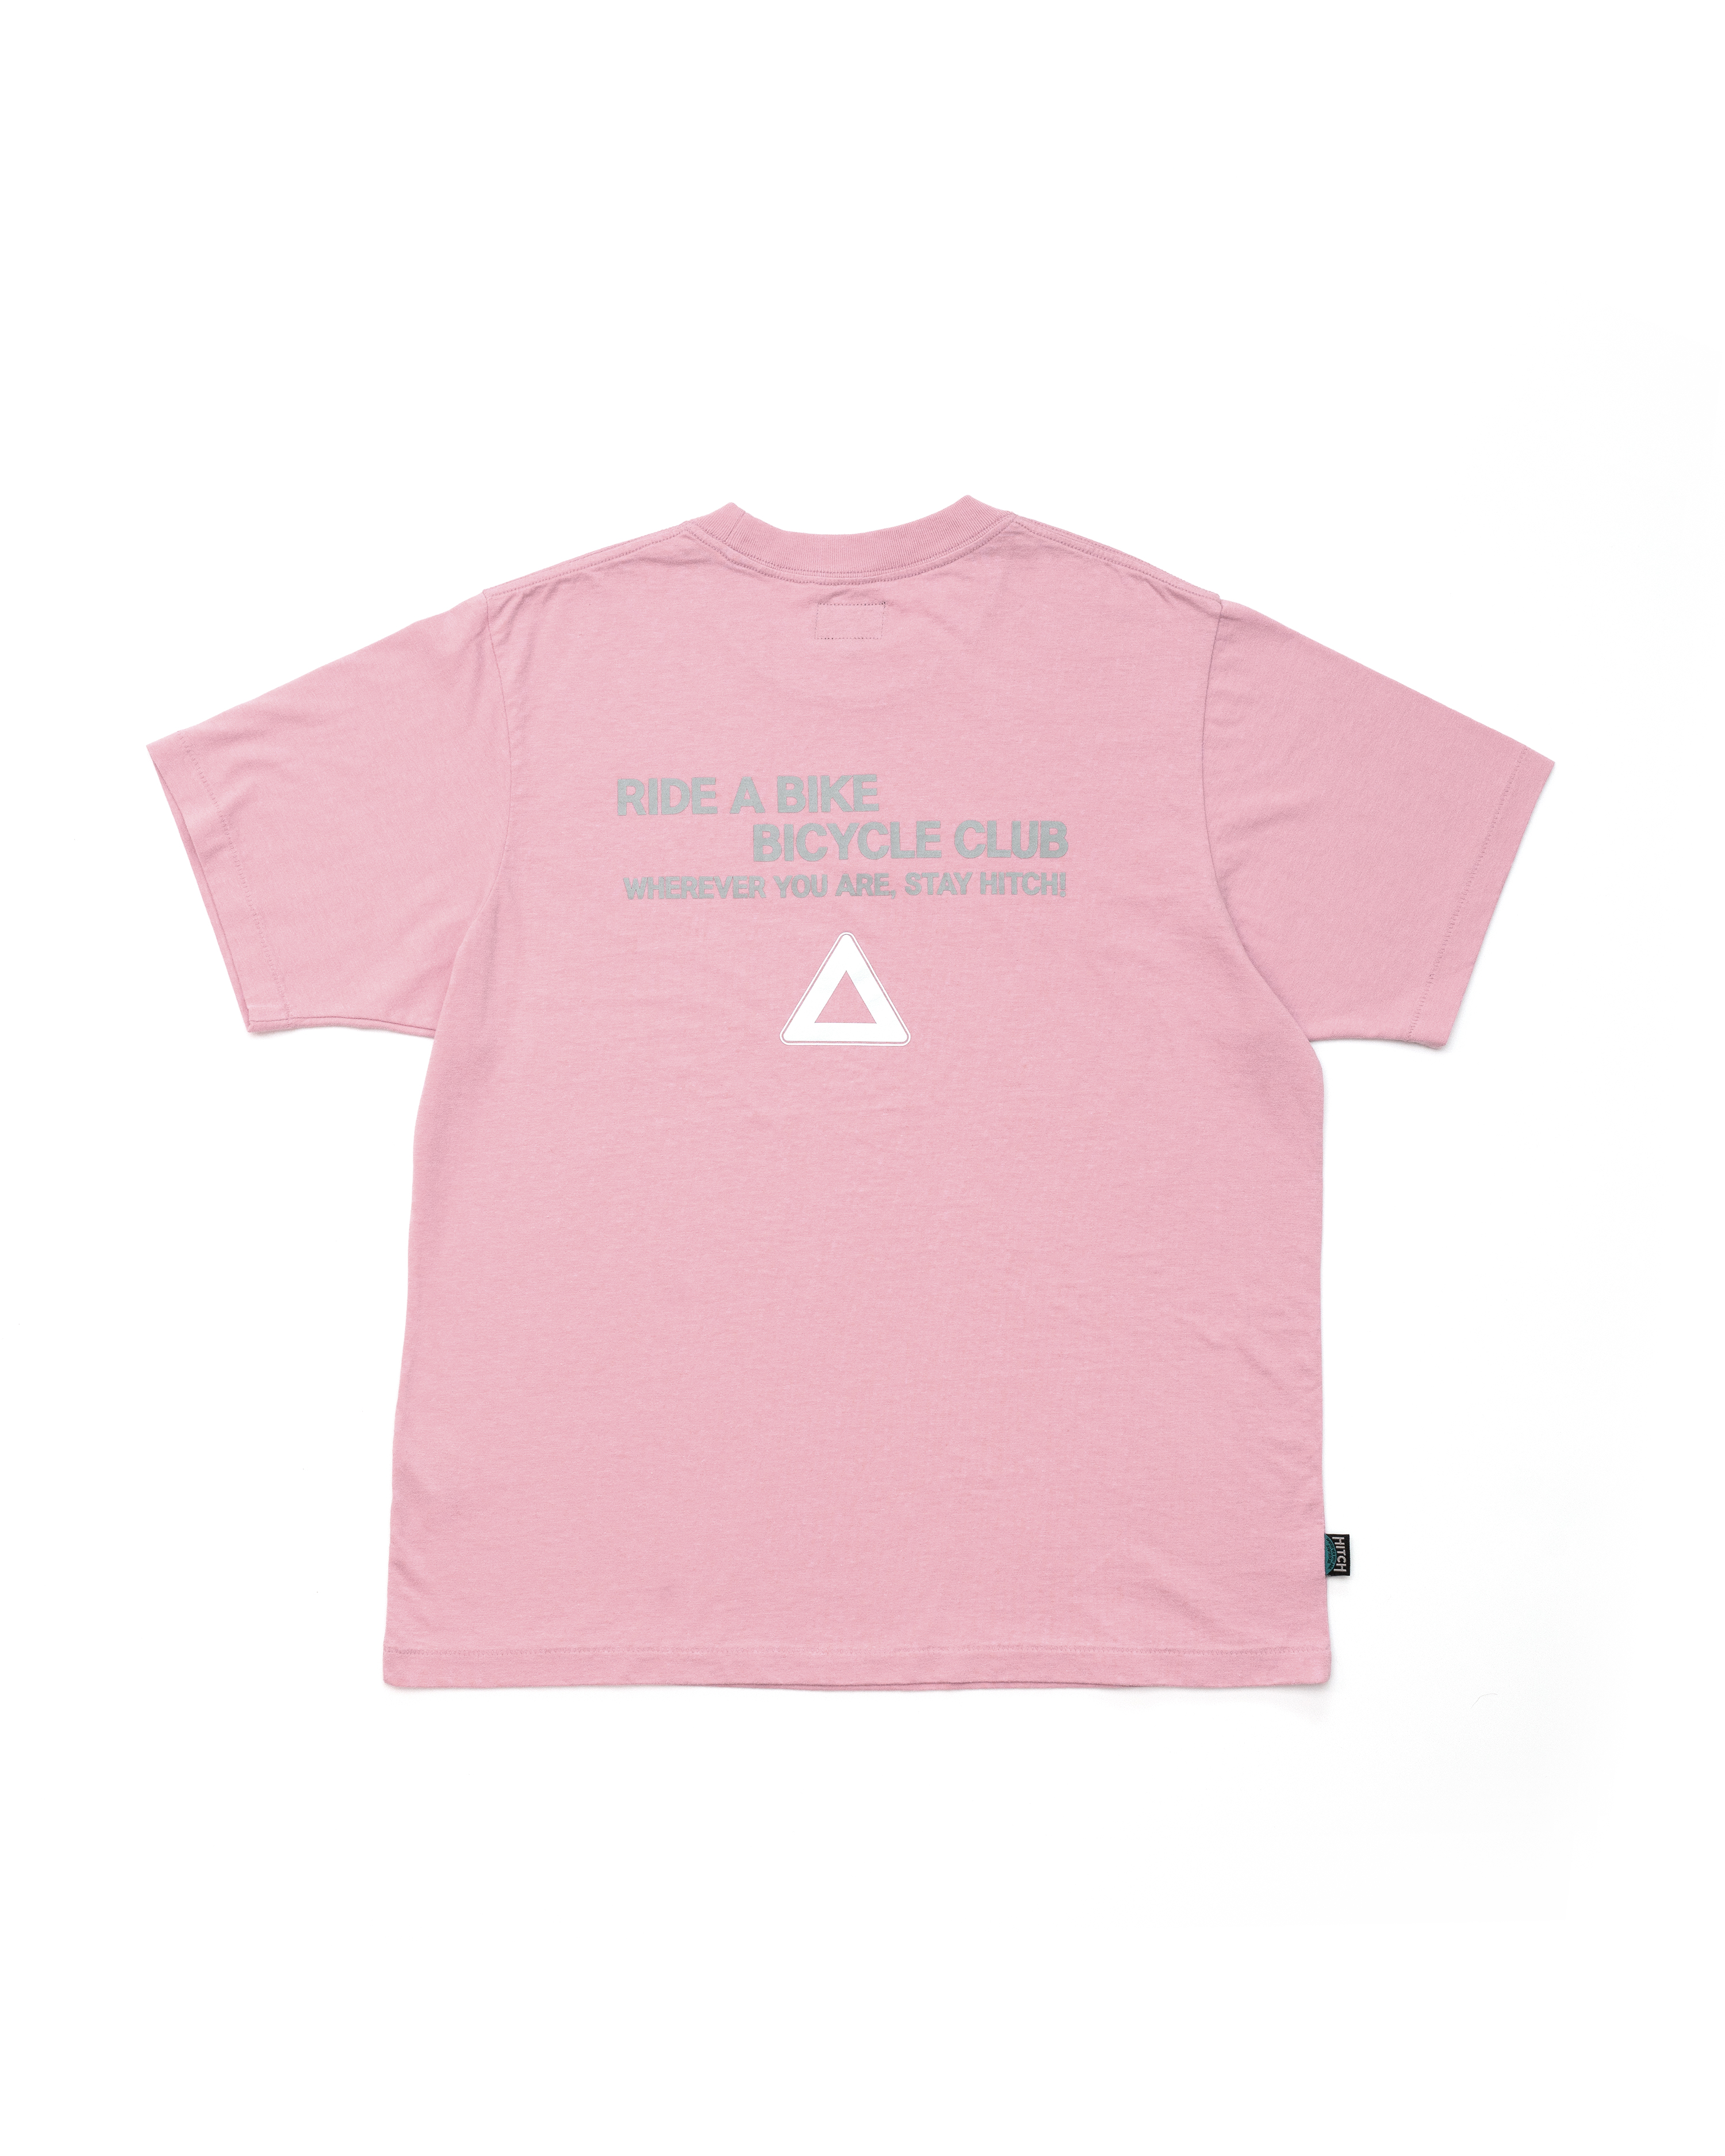 [out of stock] HBC reflector Tee - pink